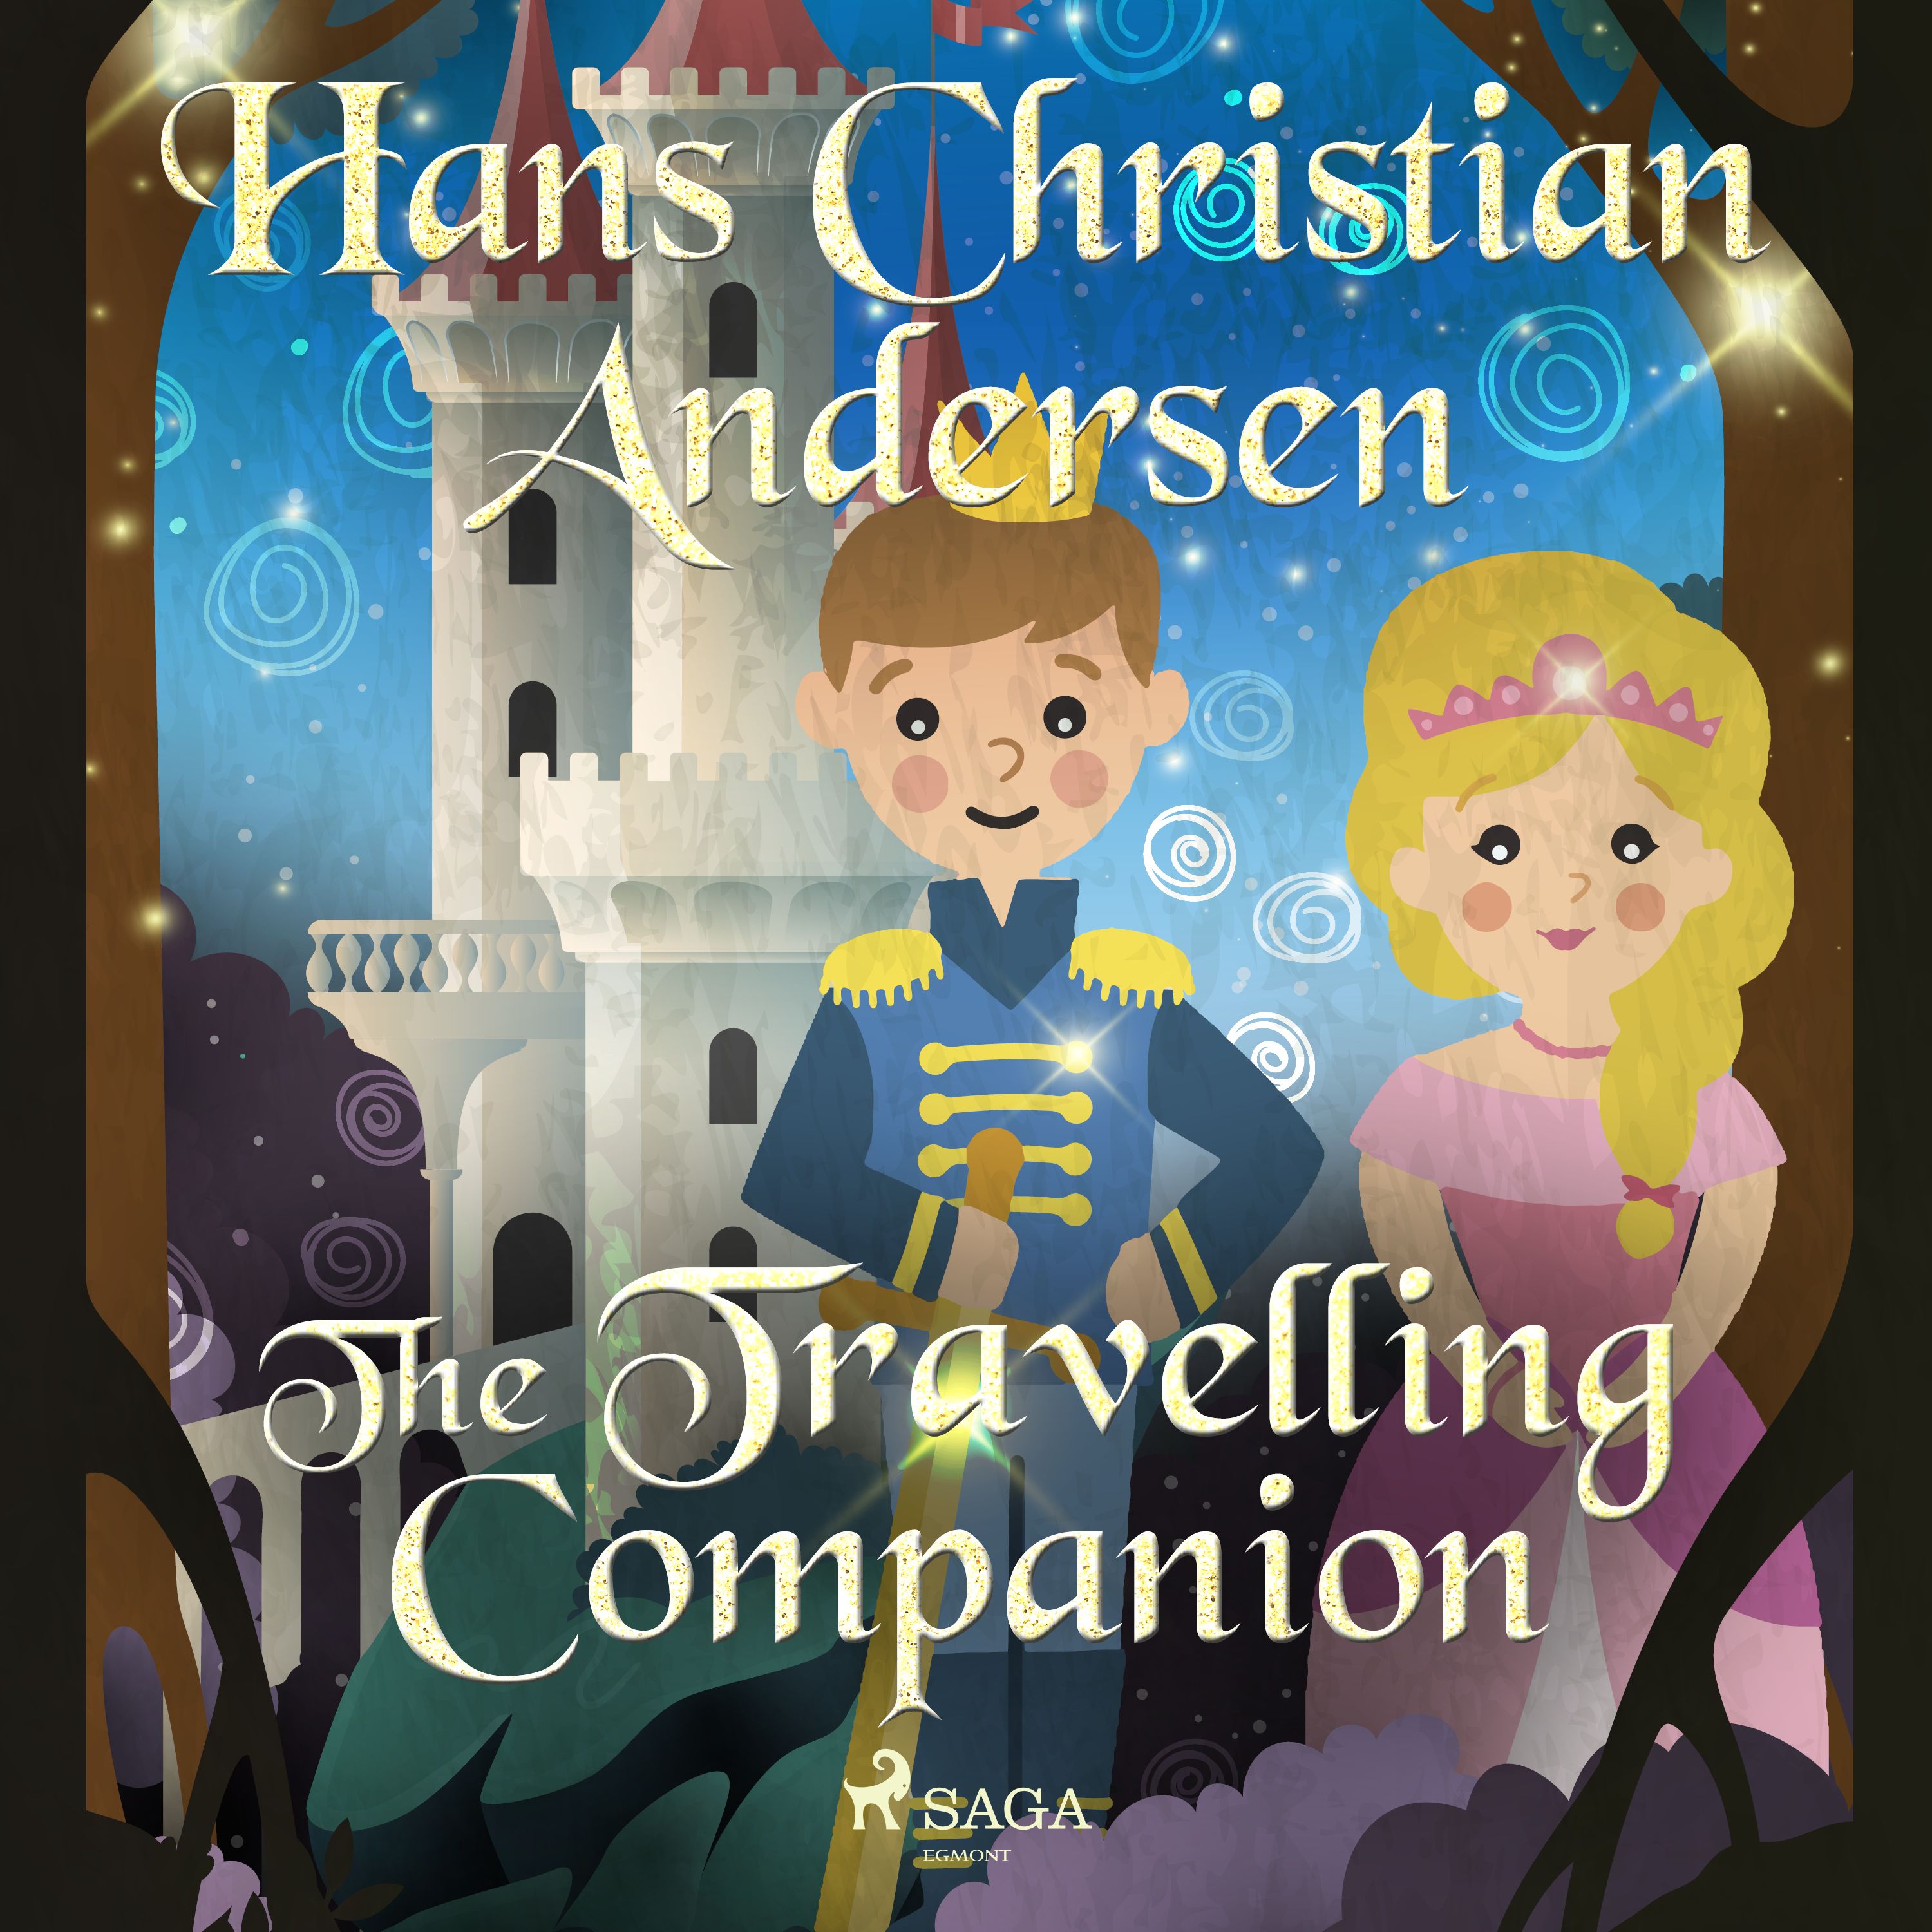 The Travelling Companion, audiobook by Hans Christian Andersen